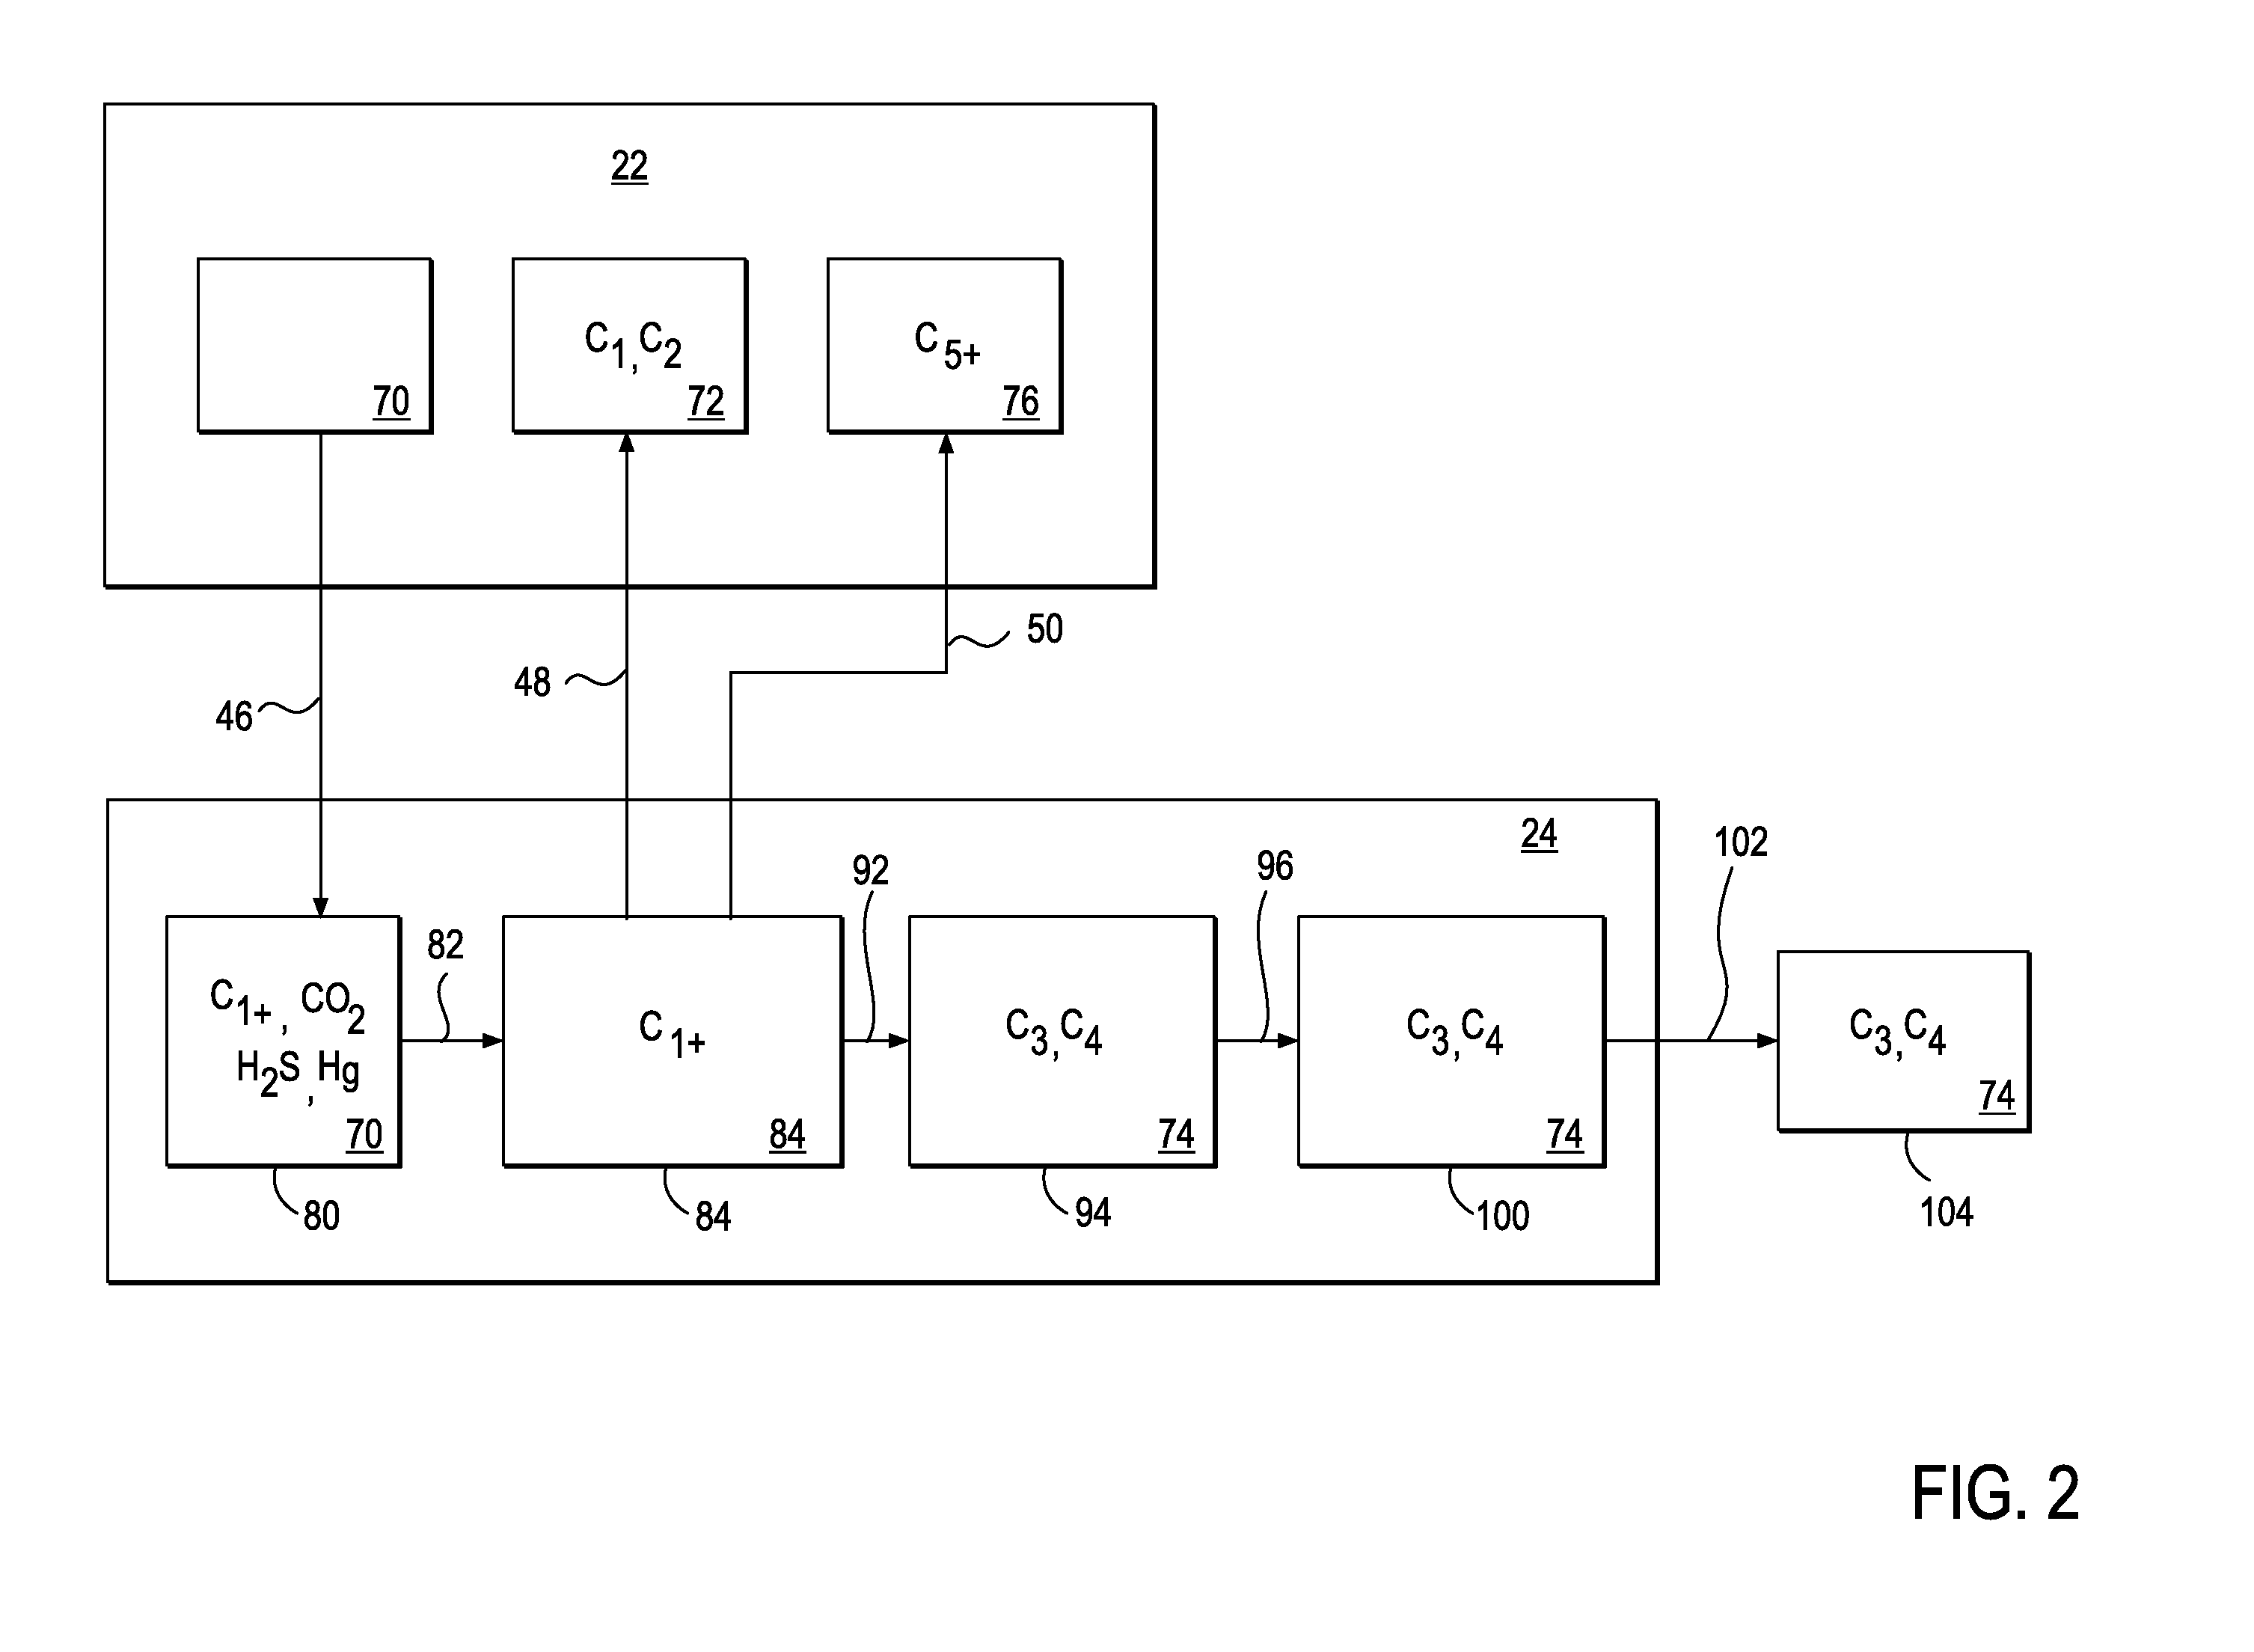 METHOD, SYSTEM, AND PRODUCTION AND STORAGE FACILITY FOR OFFSHORE LPG and LNG PROCESSING OF ASSOCIATED GASES